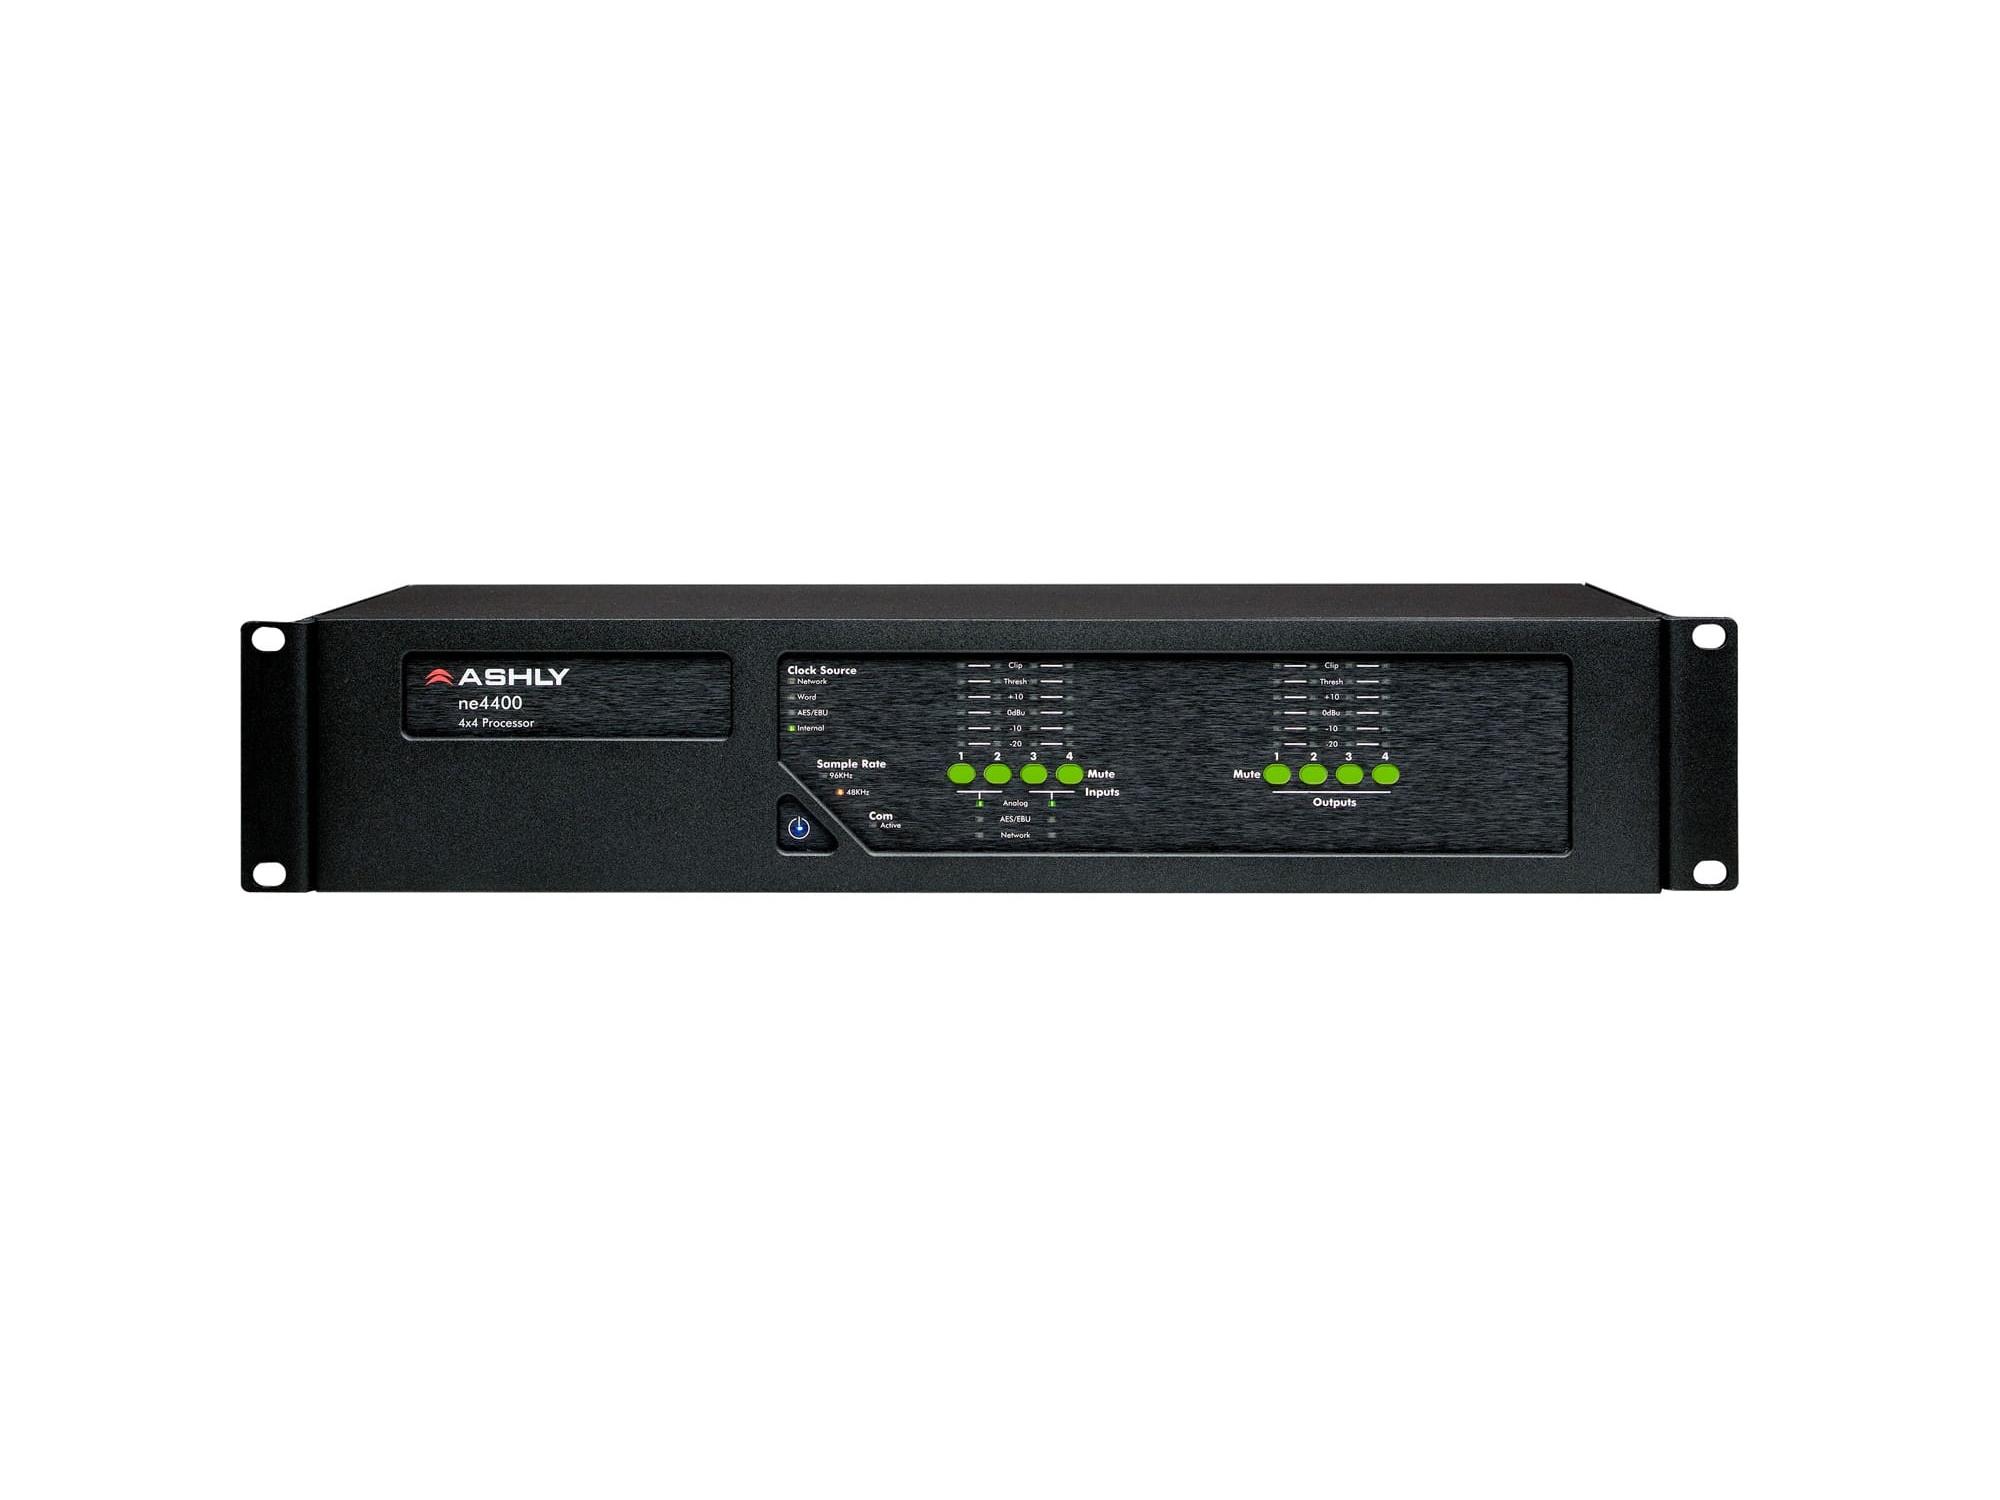 ne4400st 4x4 Protea DSP Audio System Processor with 4-Ch AES3 Outputs and Dante Card by Ashly